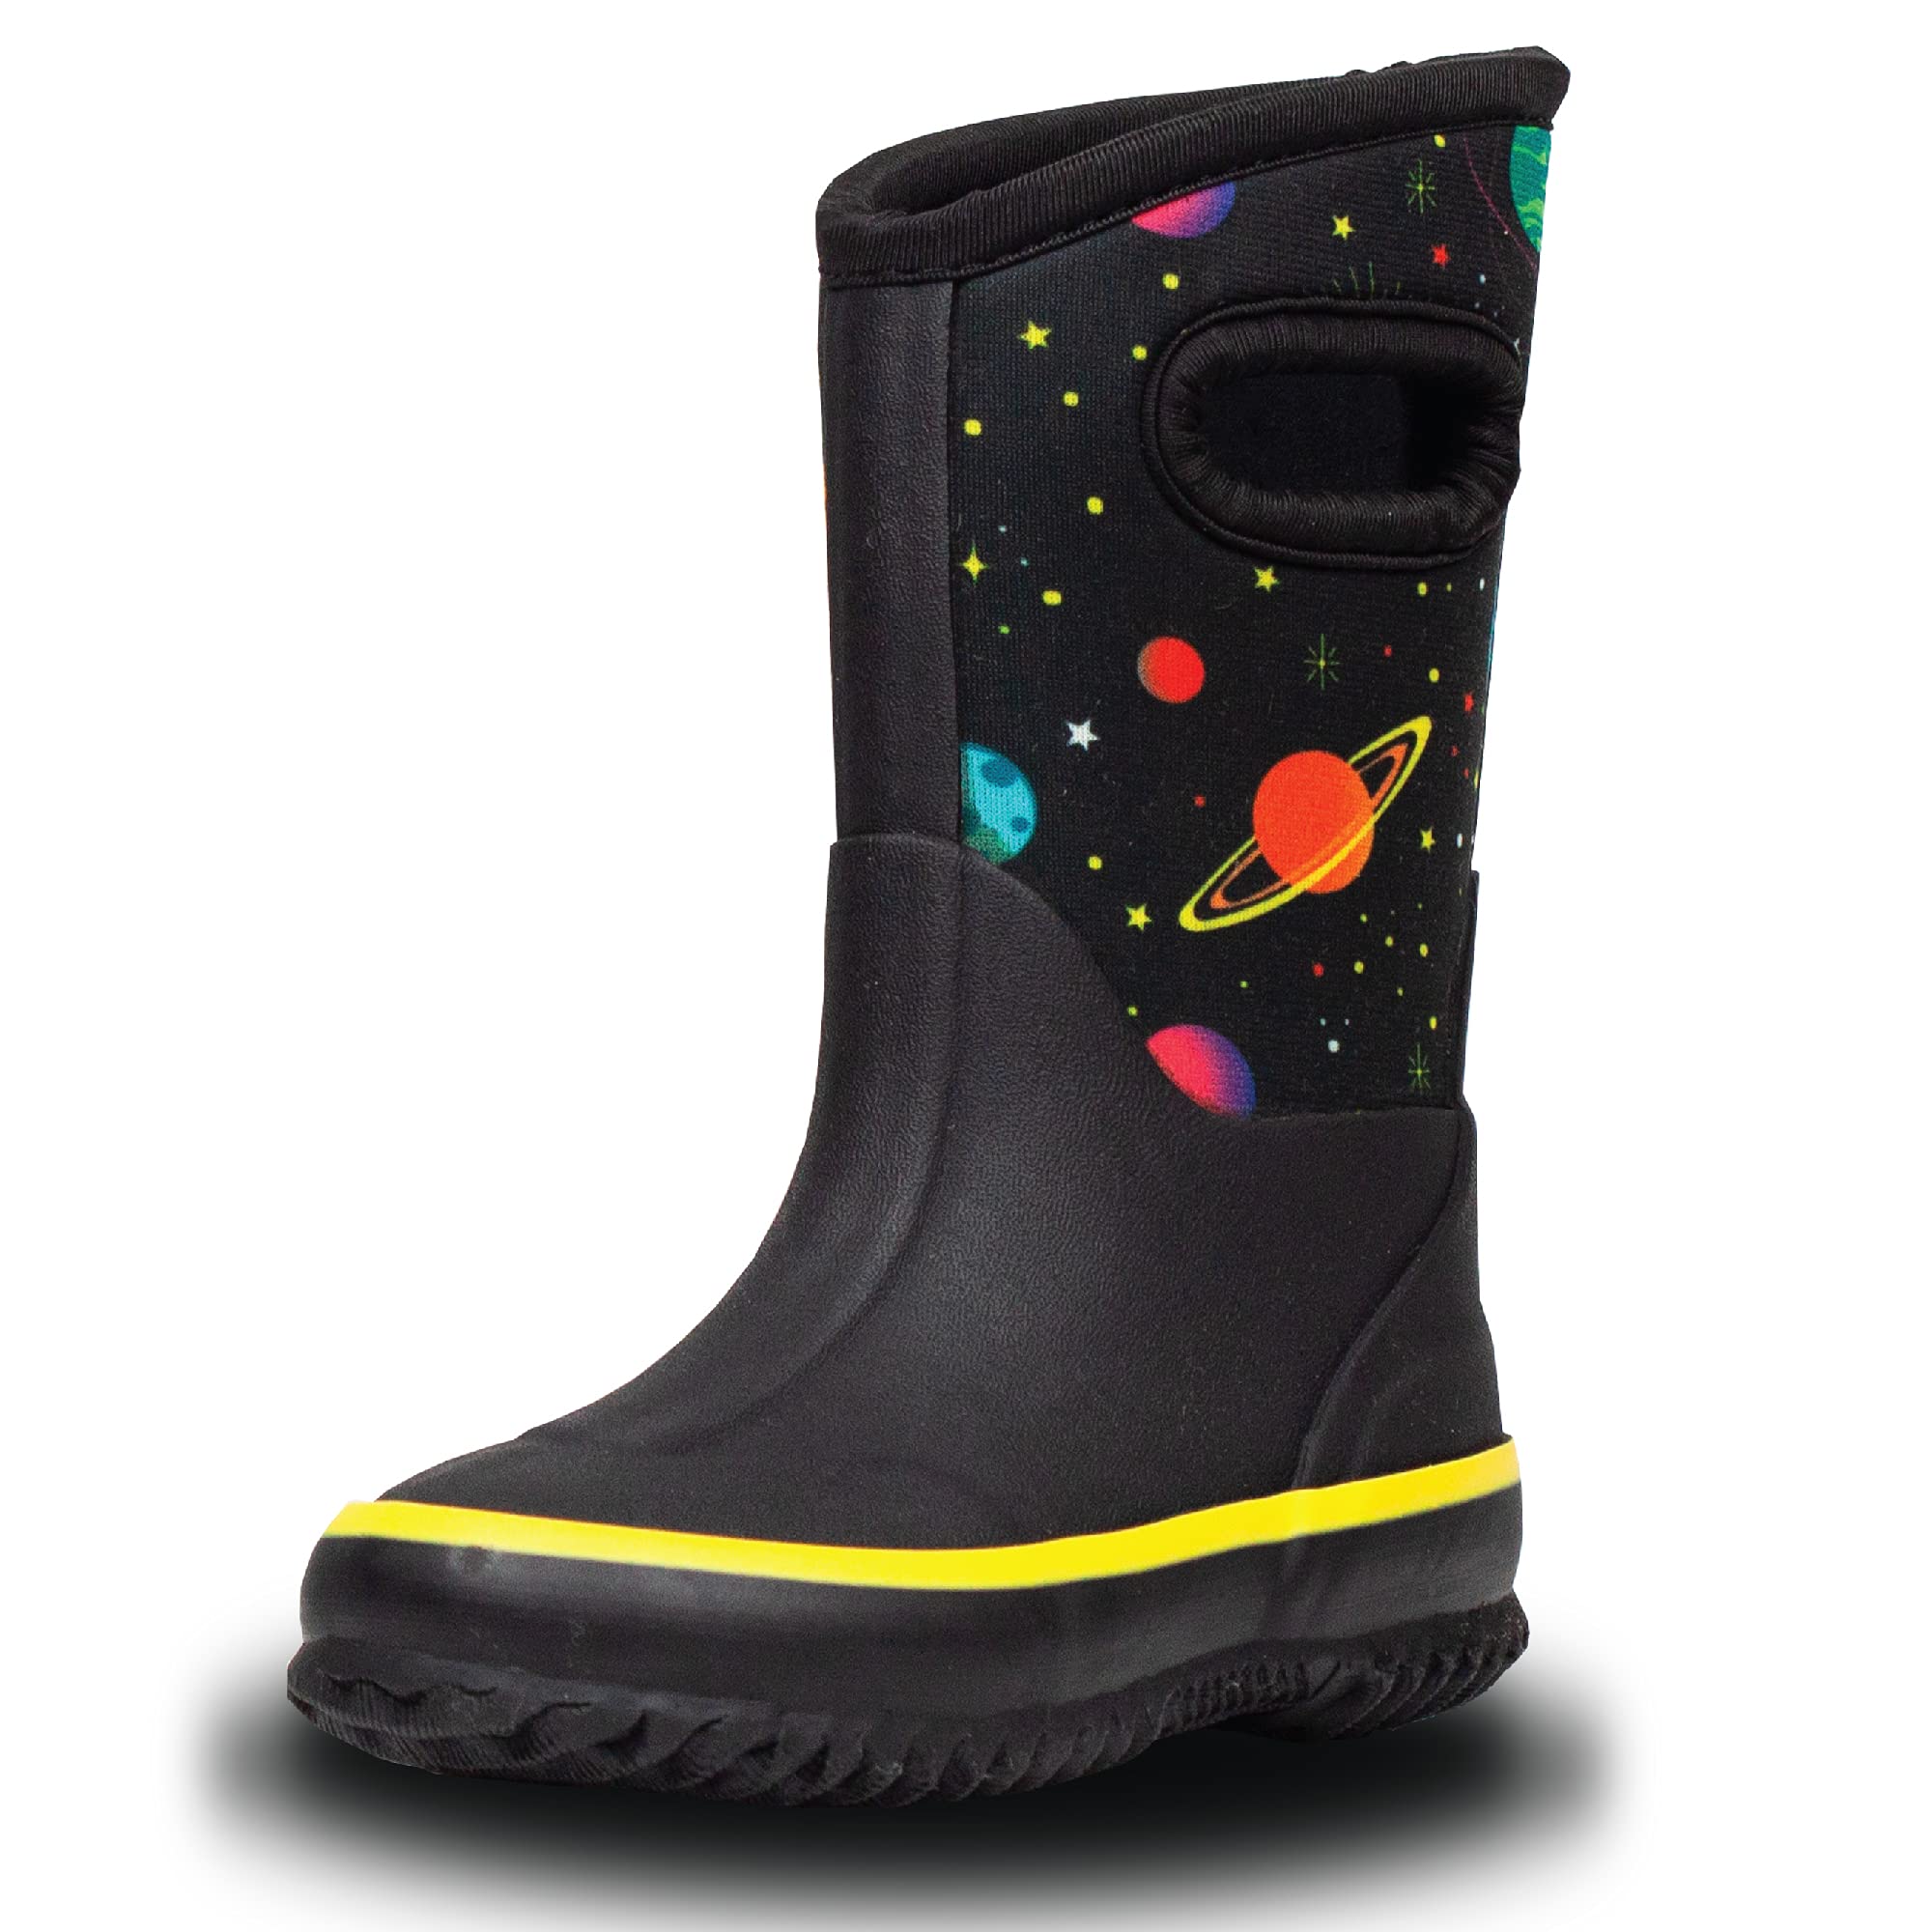 LONECONE Lone Cone Insulating All Weather MudBoots for Toddlers and Kids - Warm Neoprene Boots for Snow, Rain, and Muck